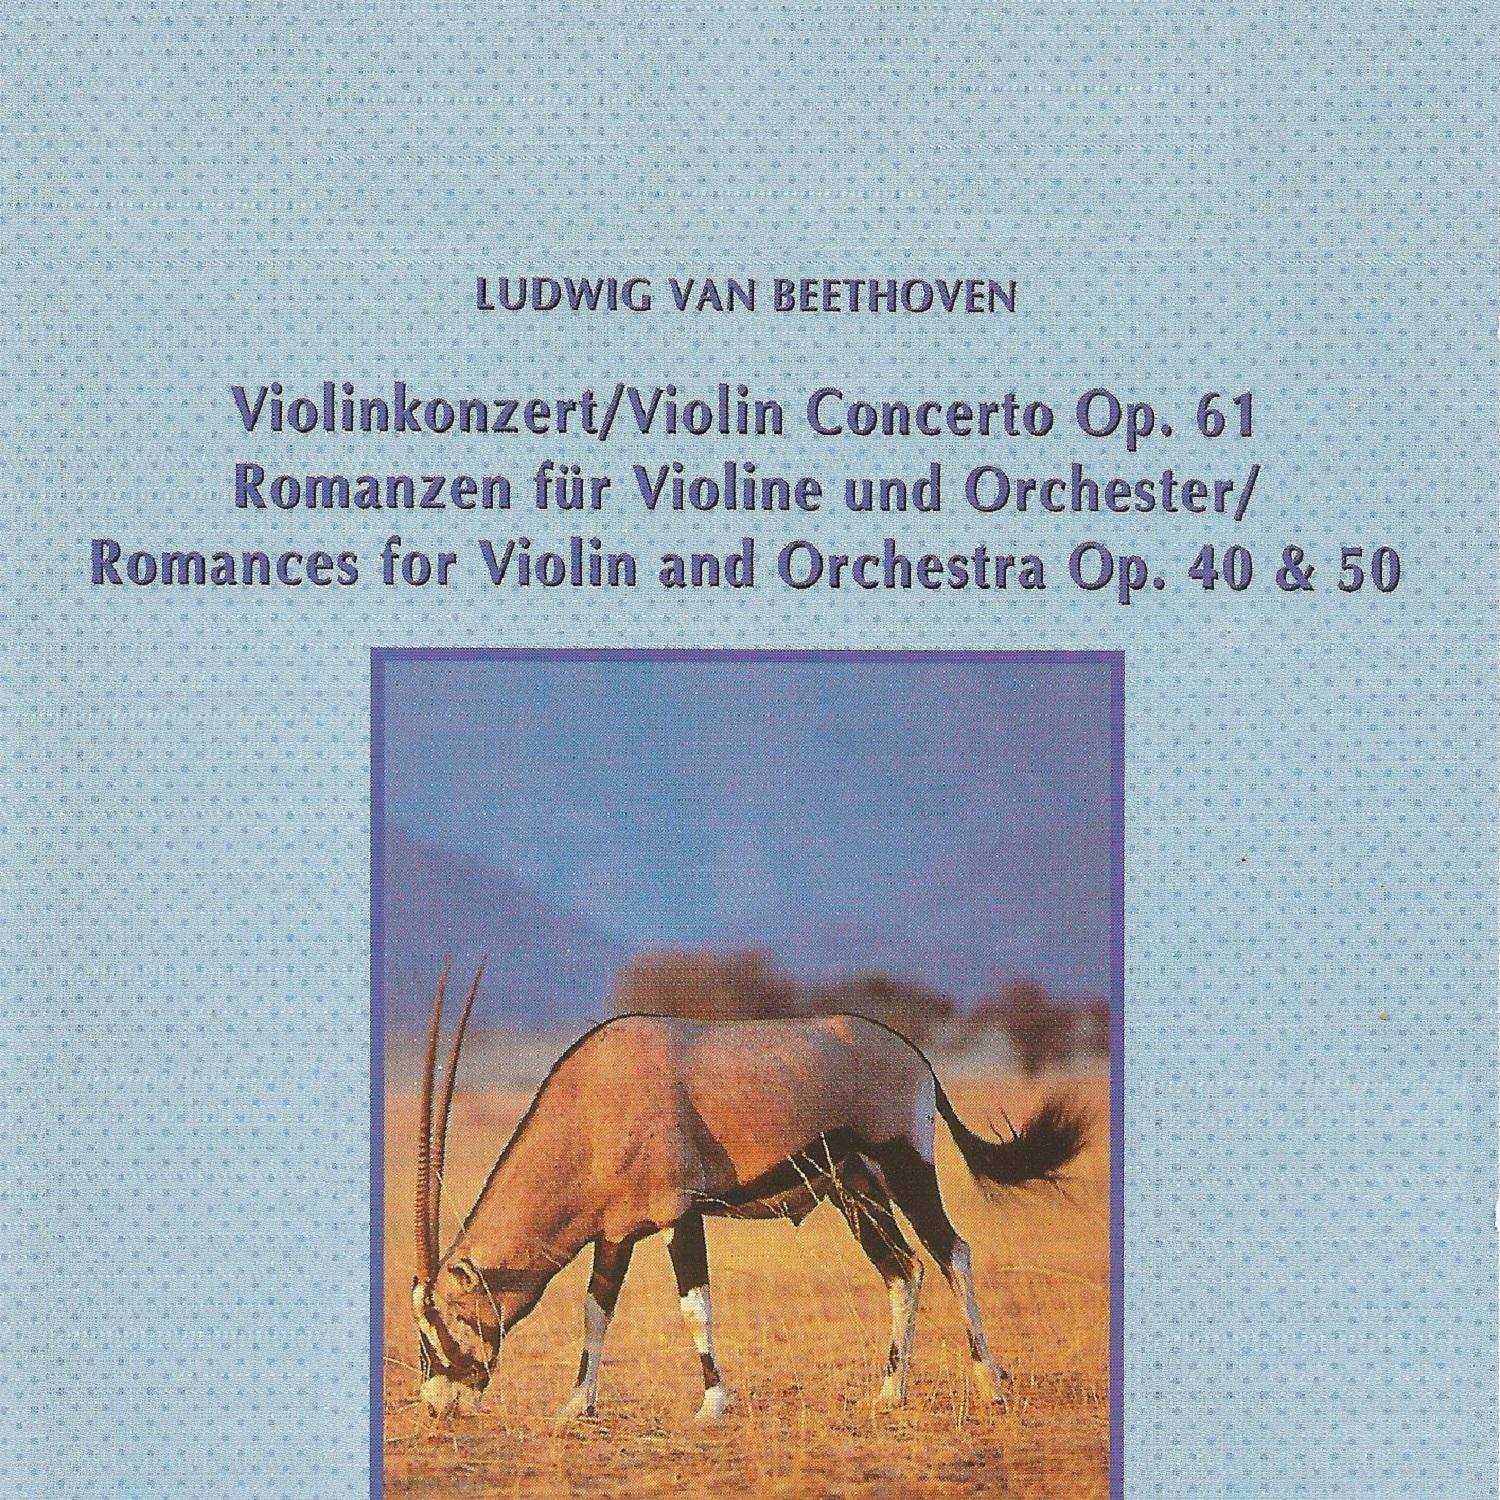 Ludwig van Beethoven - Romances for Violin and Orchestra